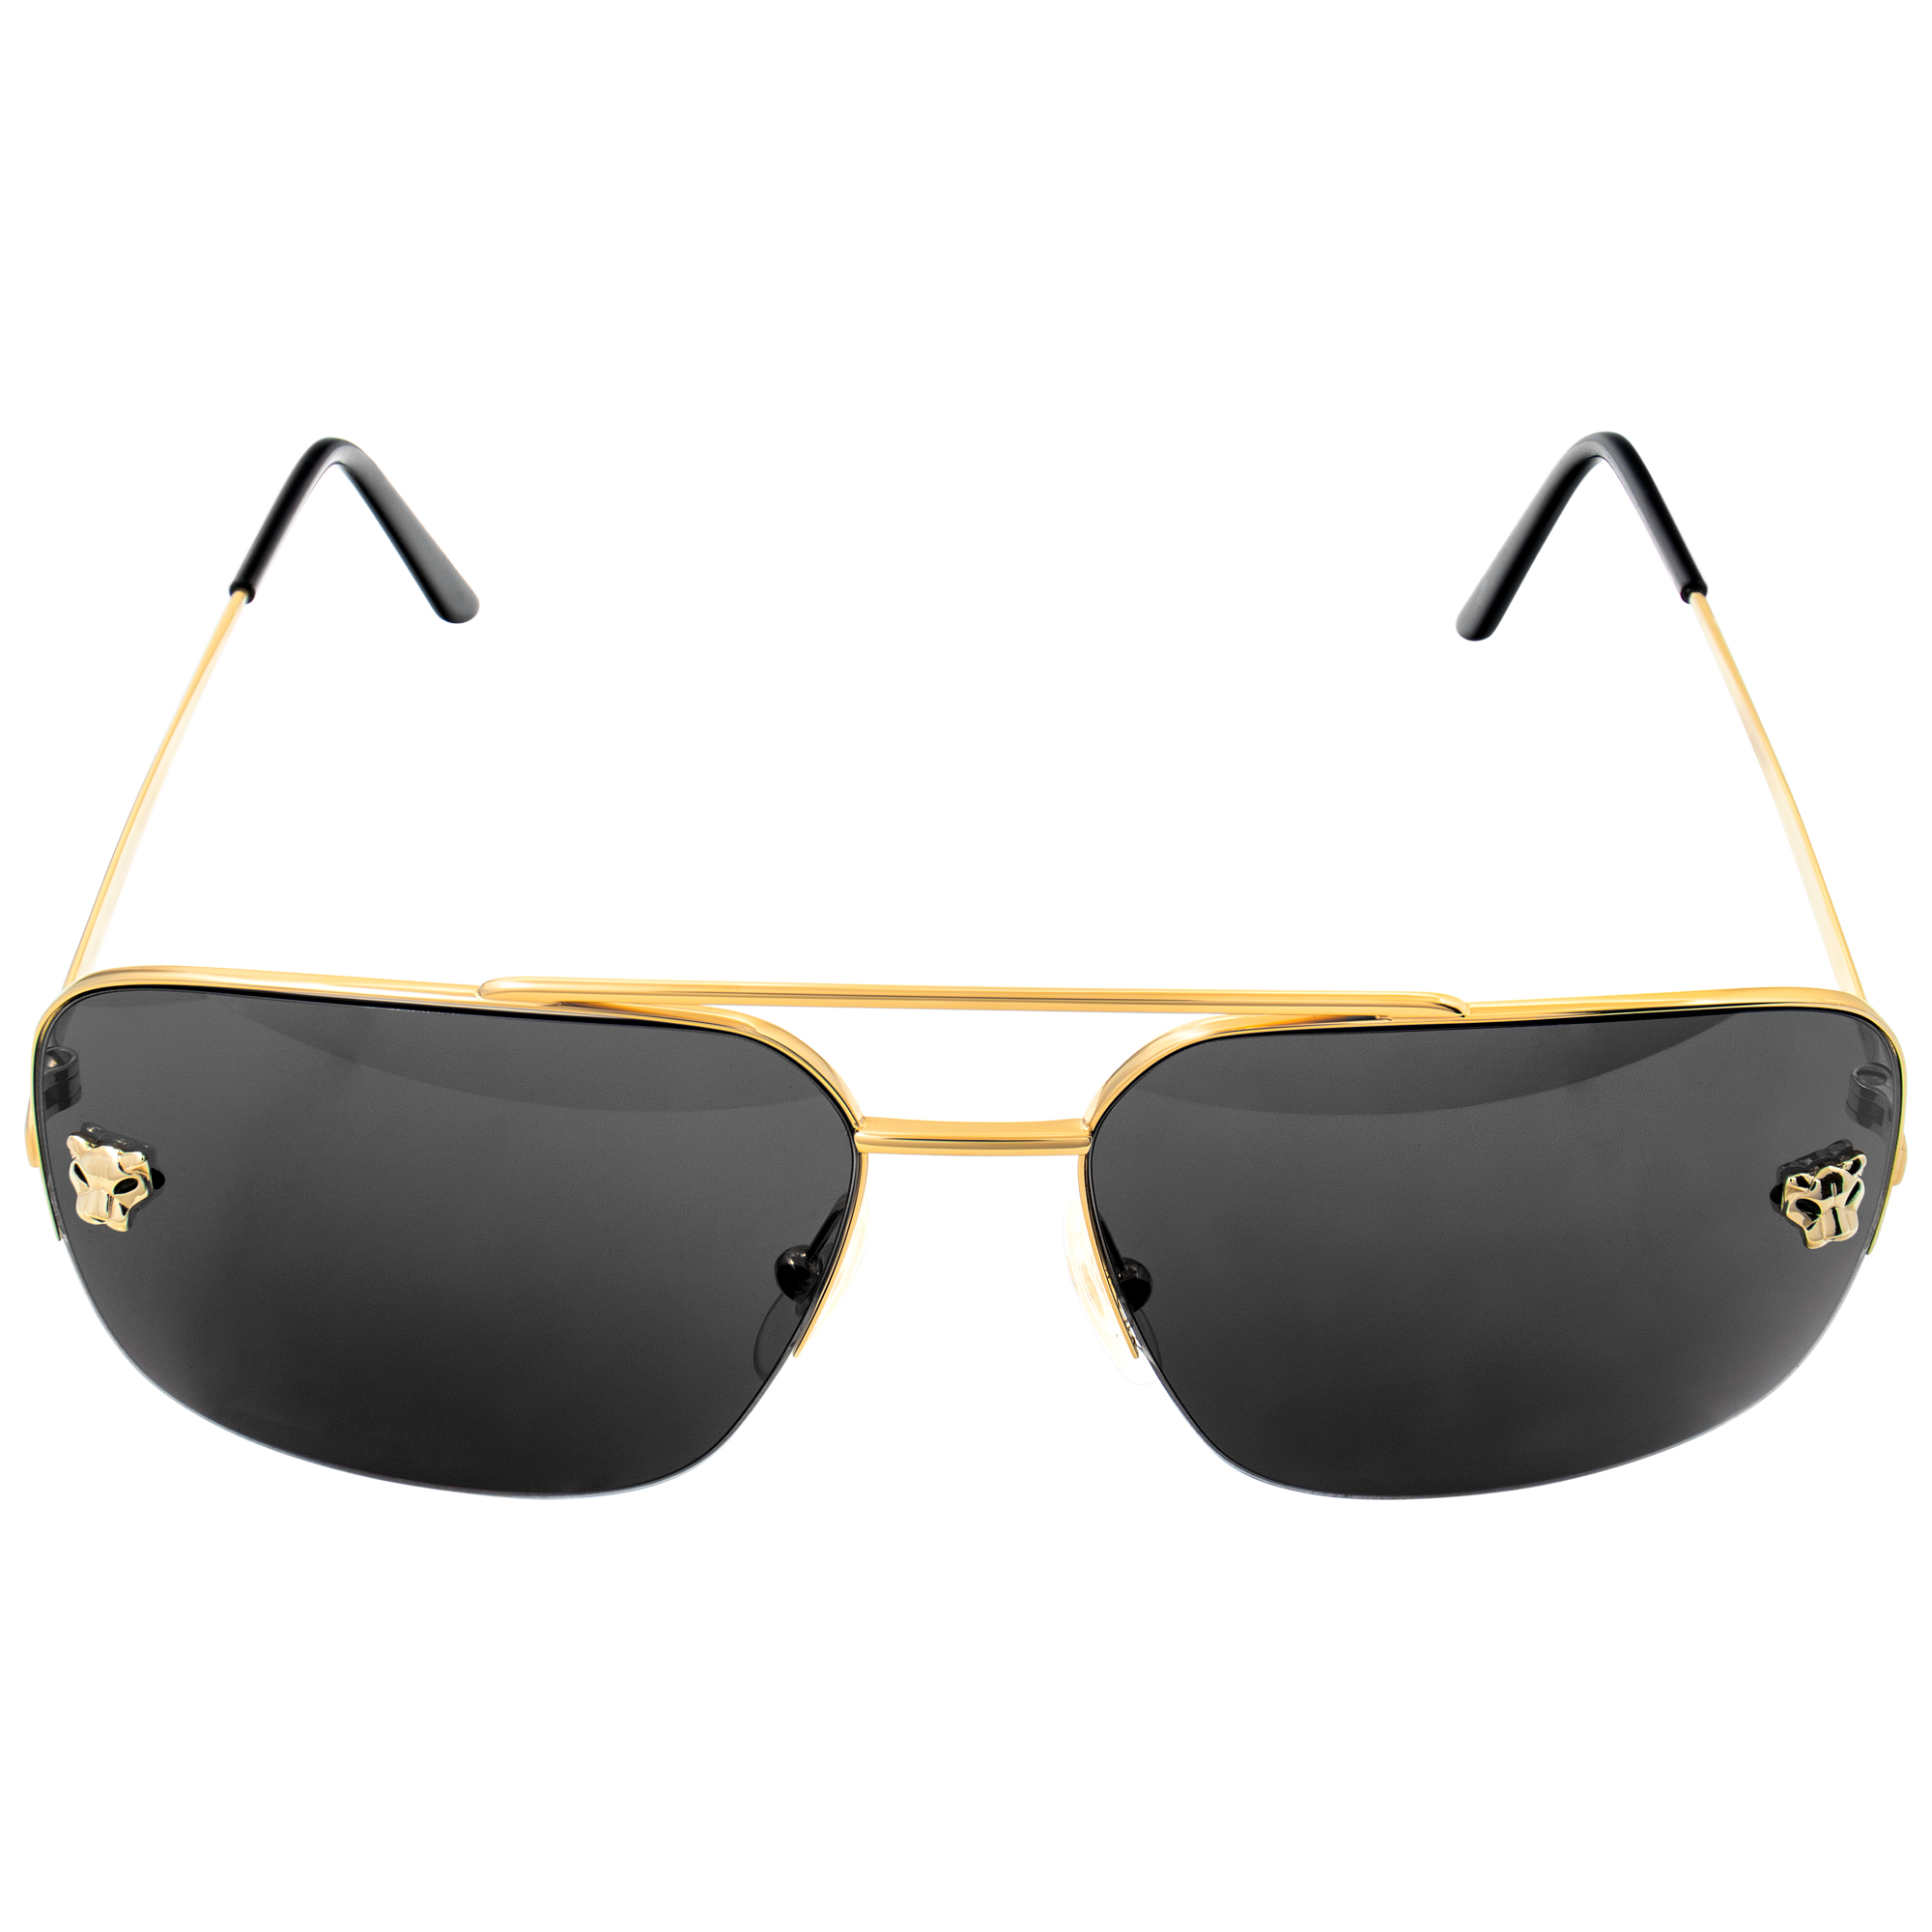 Cartier Panthere sunglasses image 1